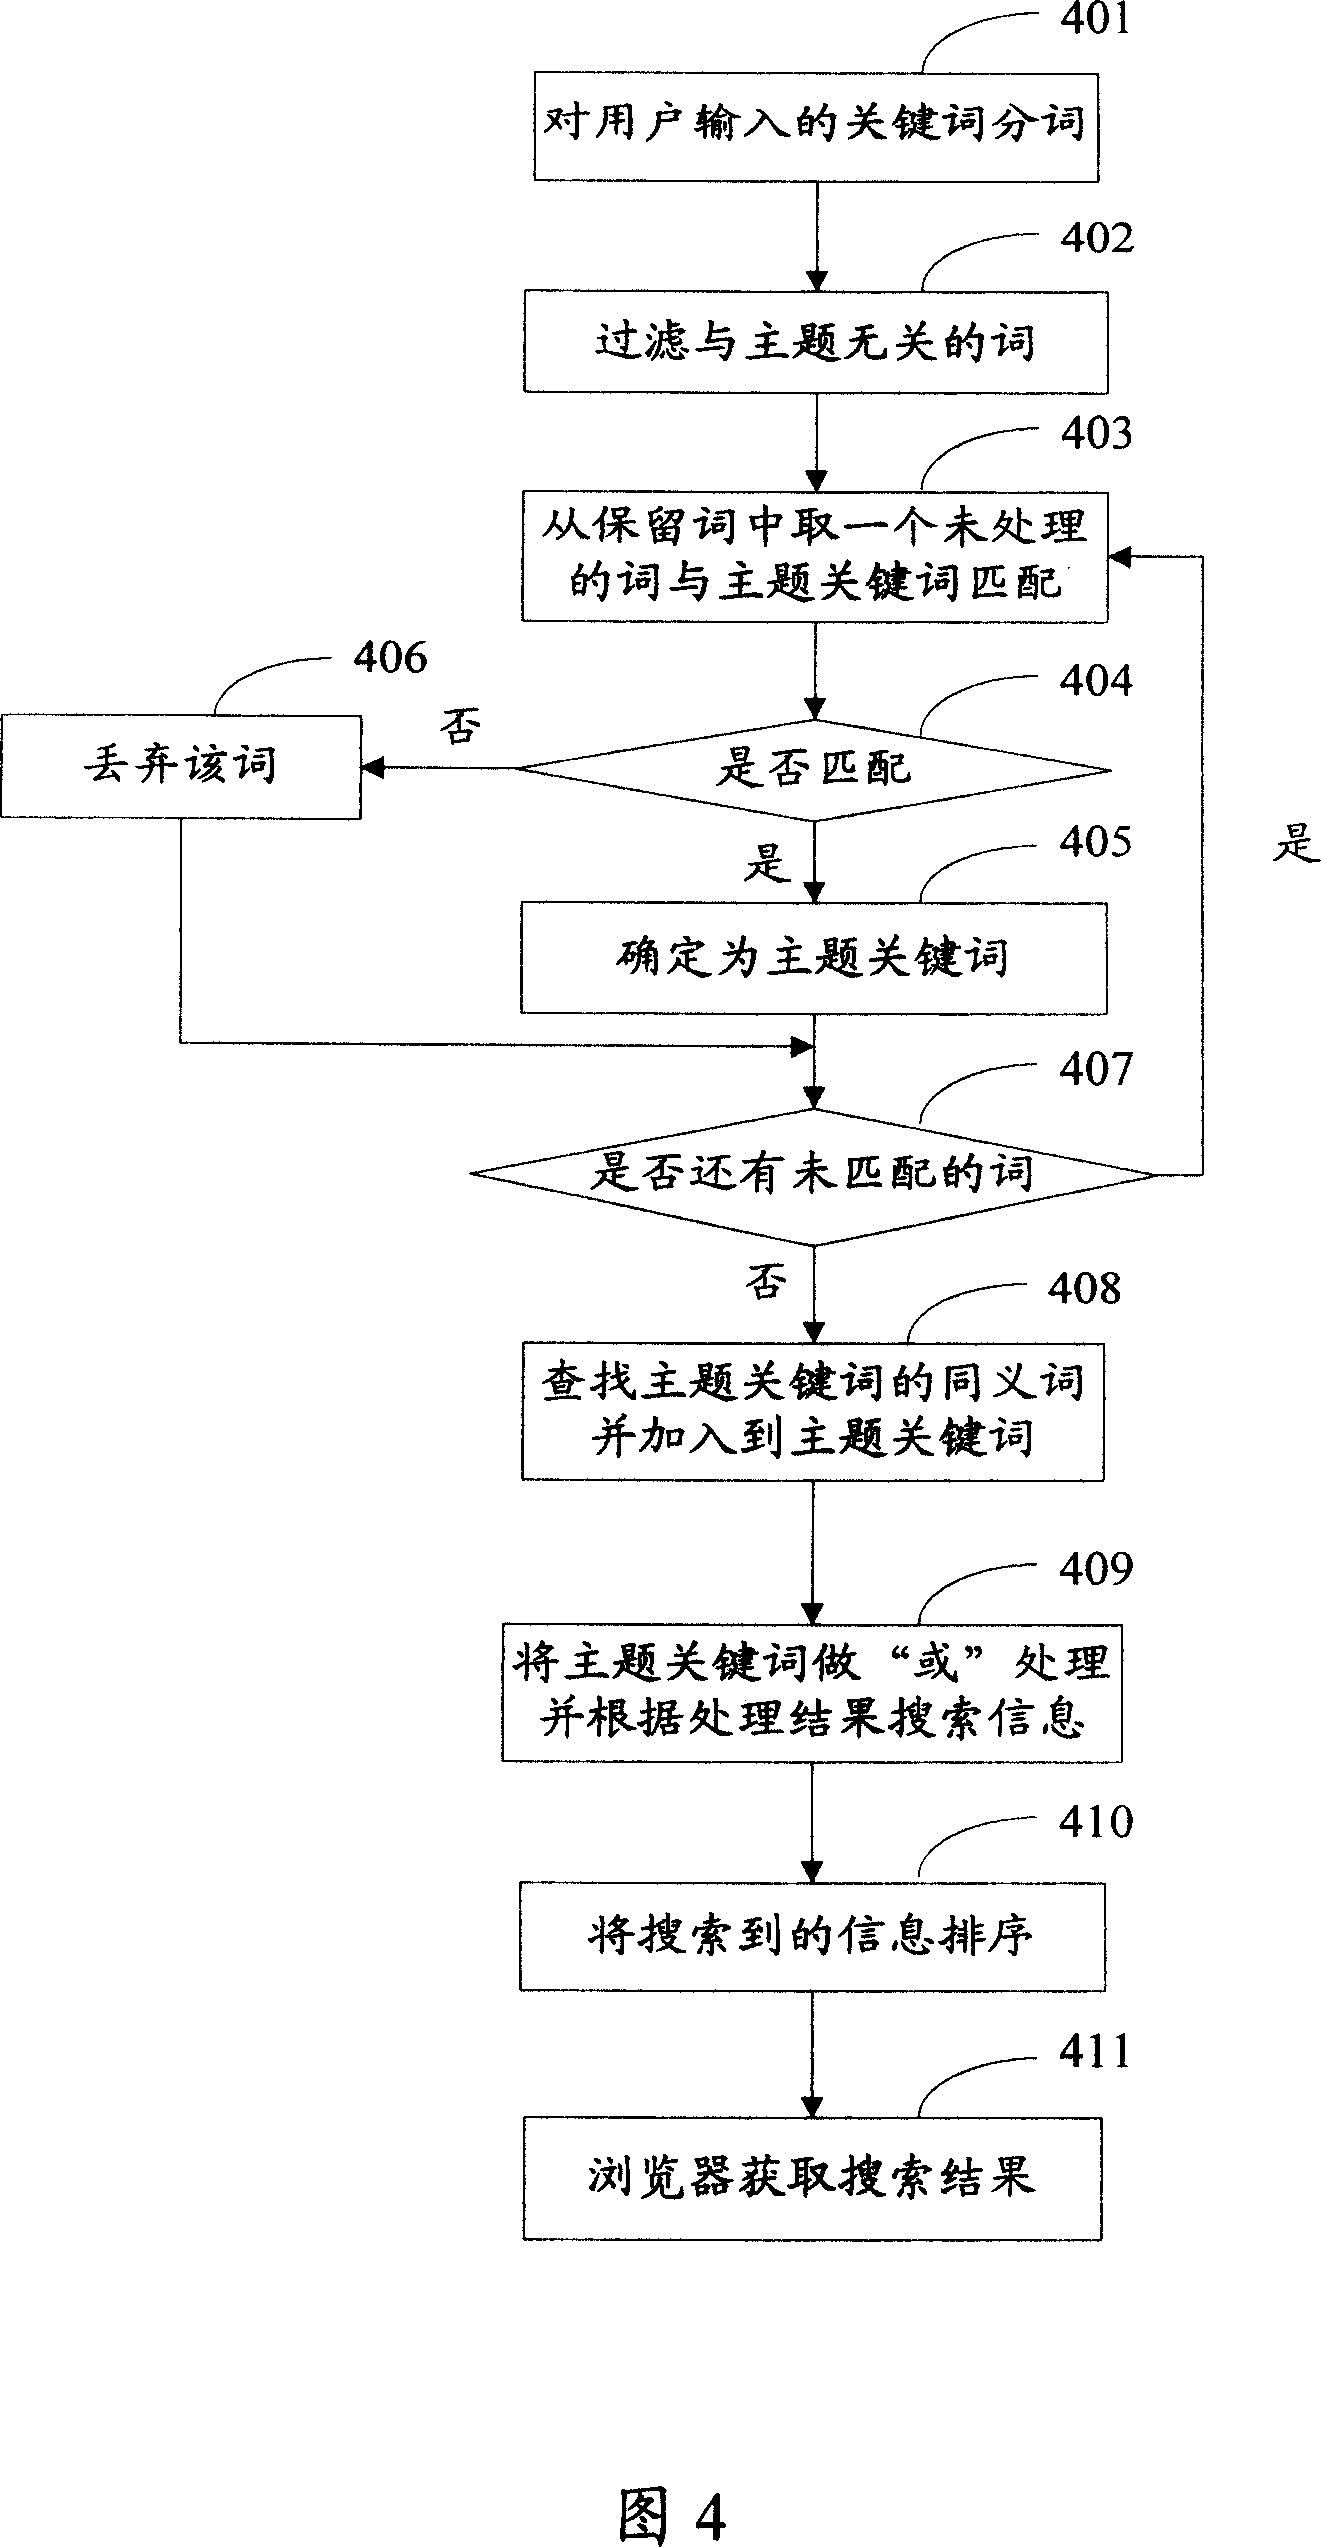 Method and system for searching information